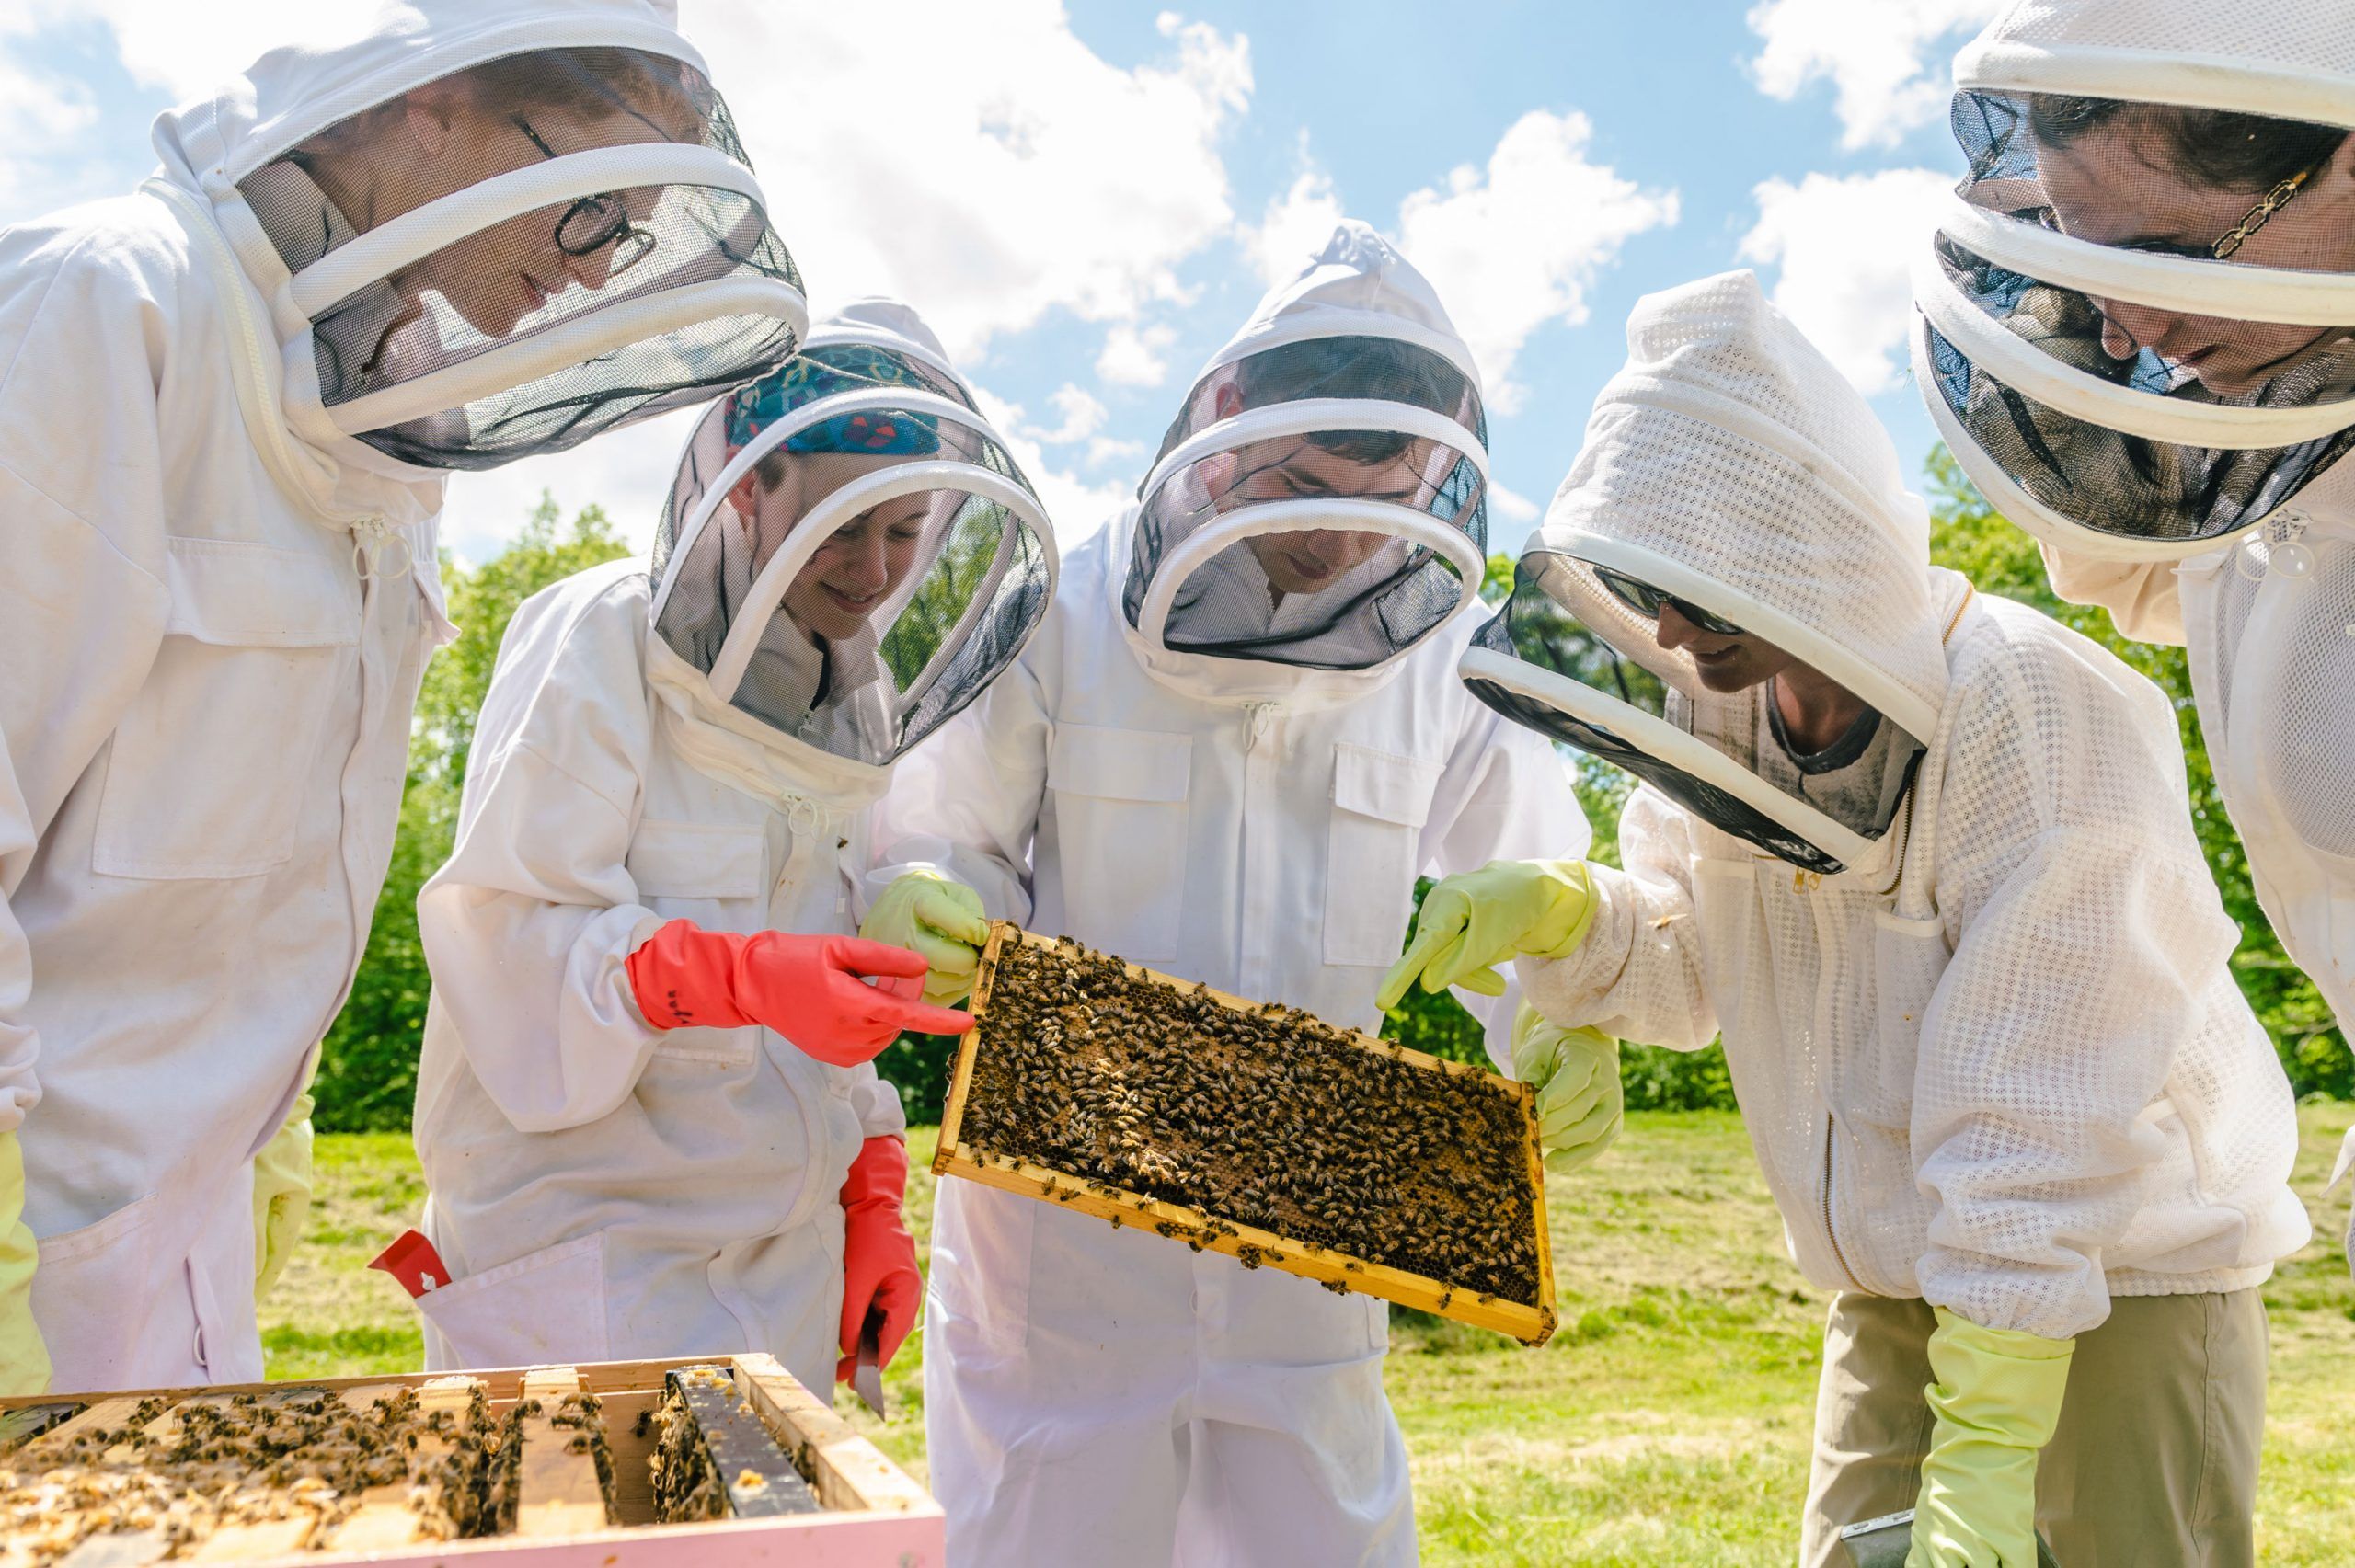 Researchers in bee suits examining a hive